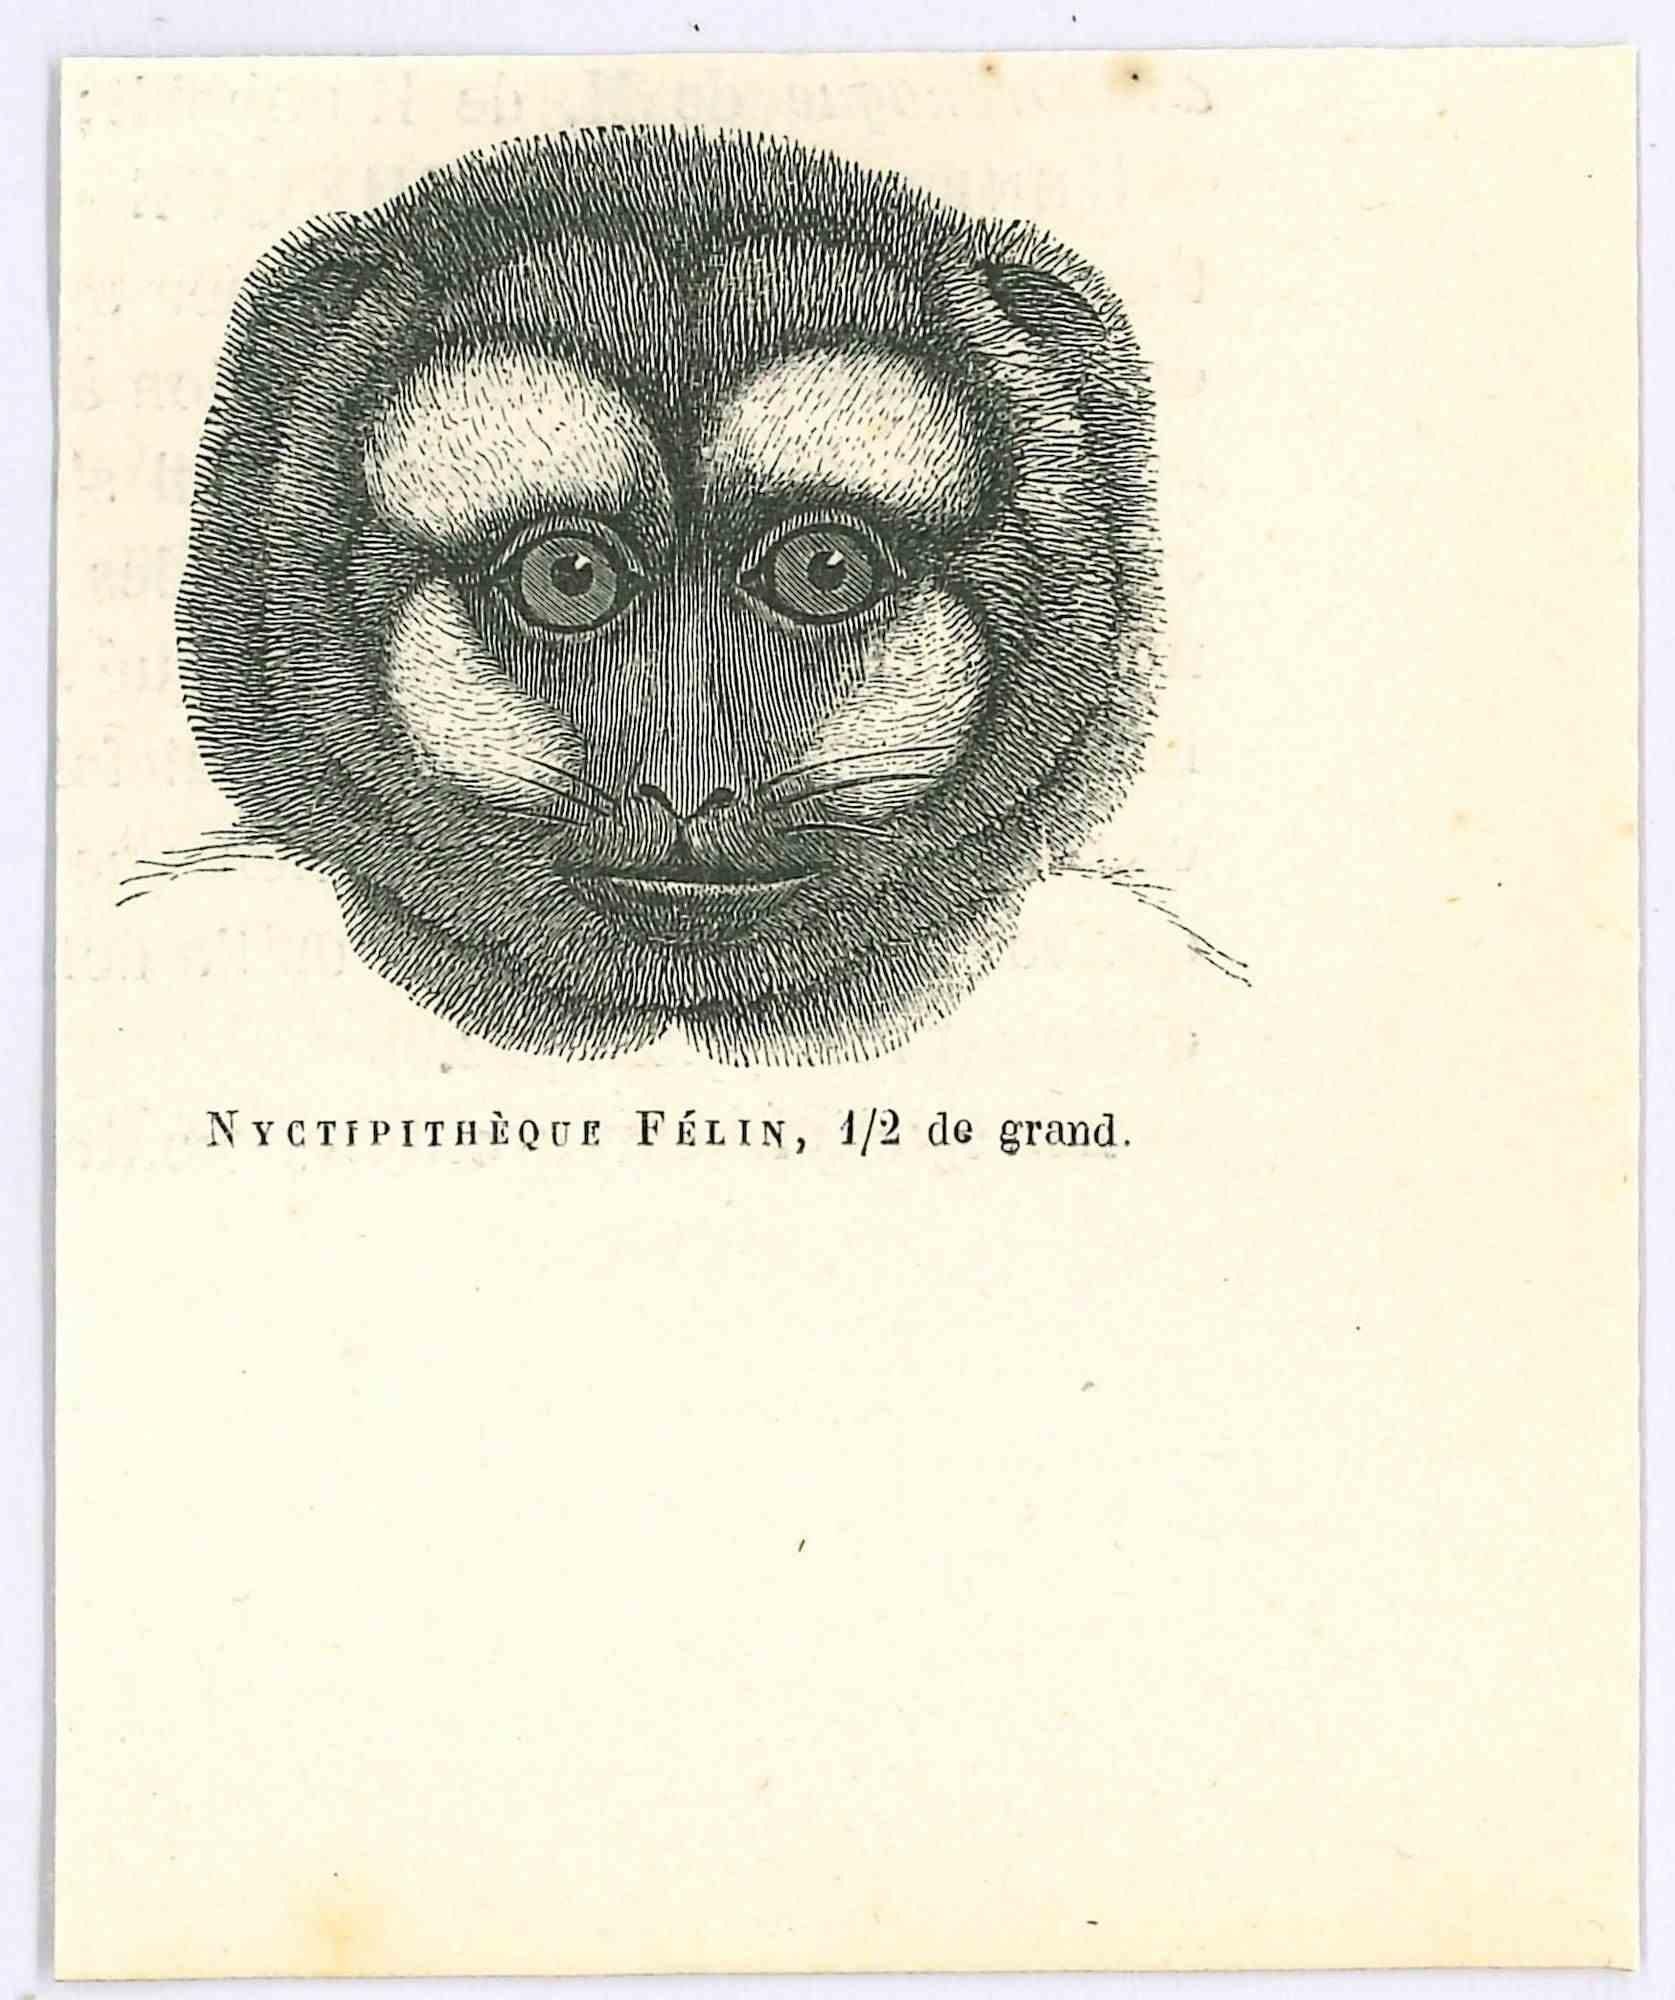 Night Monkey is an original lithograph on ivory-colored paper, realized by Paul Gervais (1816-1879). The artwork is from The Series of "Les Trois Règnes de la Nature", and was published in 1854.

Good conditions.

Titled on the lower. With the notes